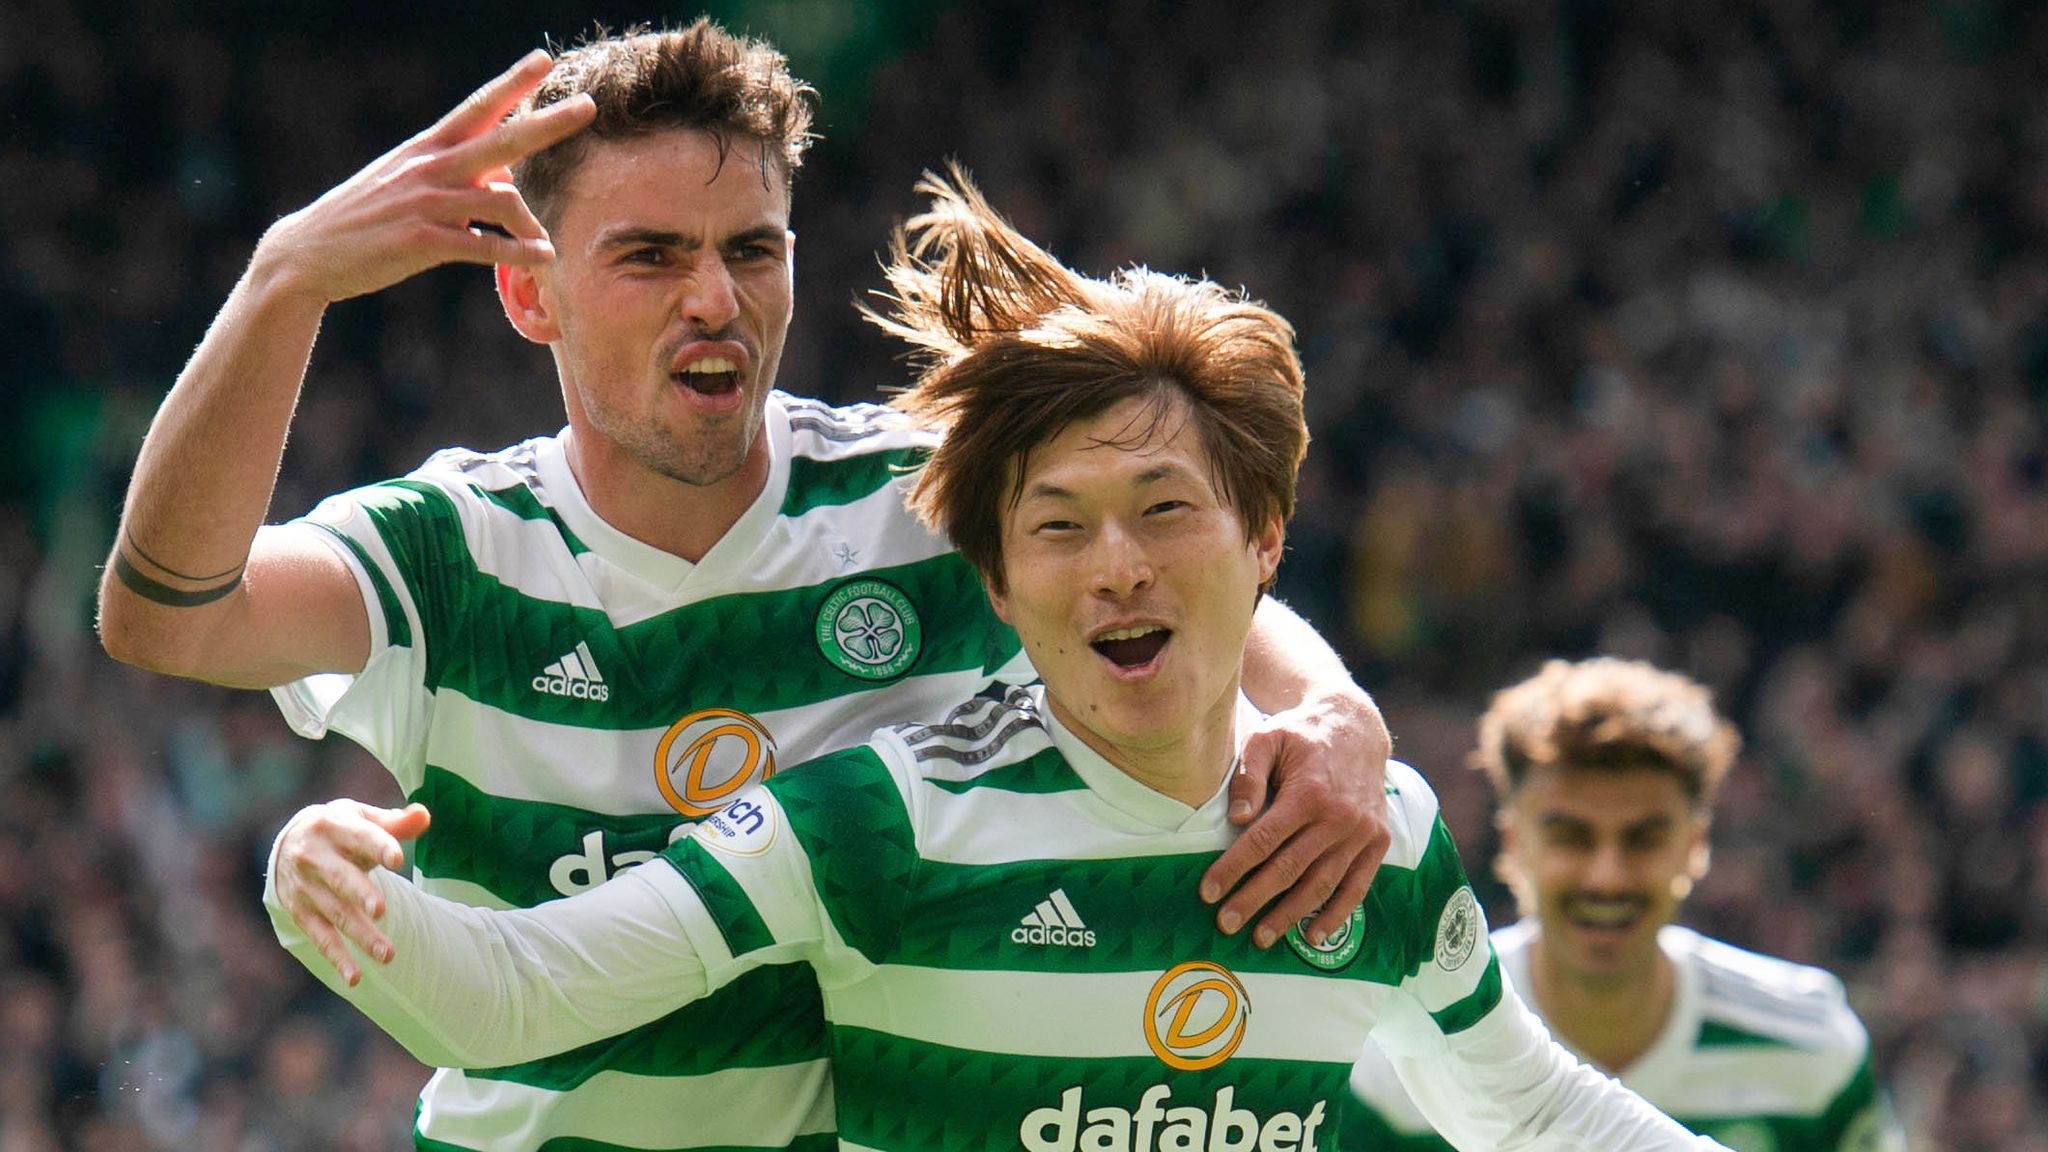 Celtic 3-2 Rangers: Hoops move 12 points clear with victory in 